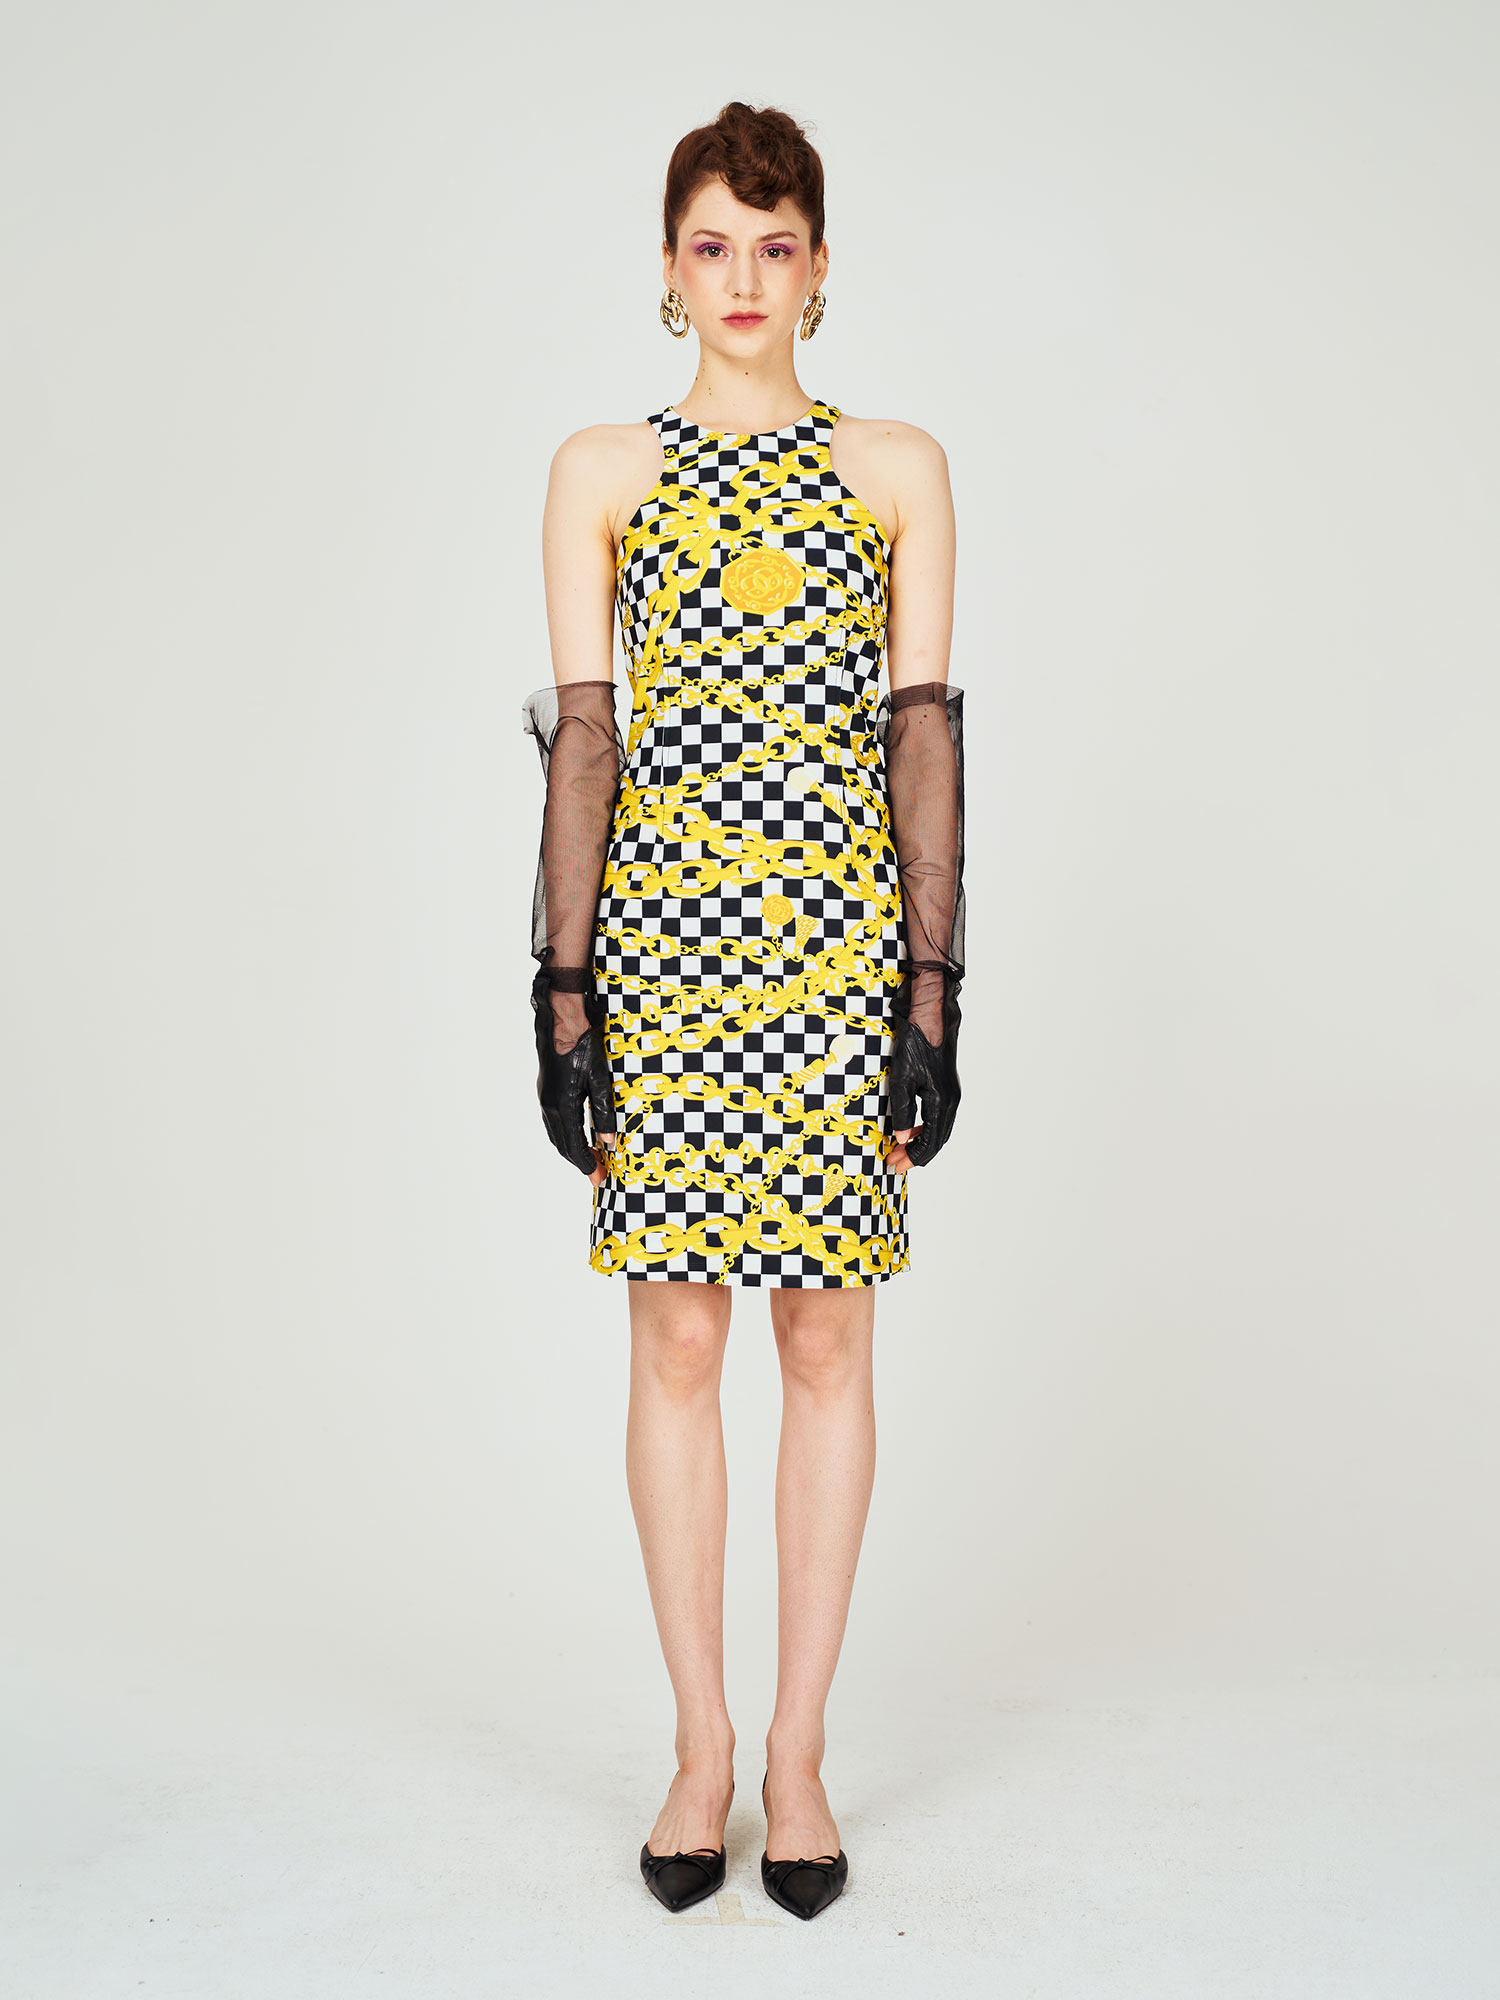 CHECKER BOARD CHAIN  WITH RUPPLE BACK DRESS